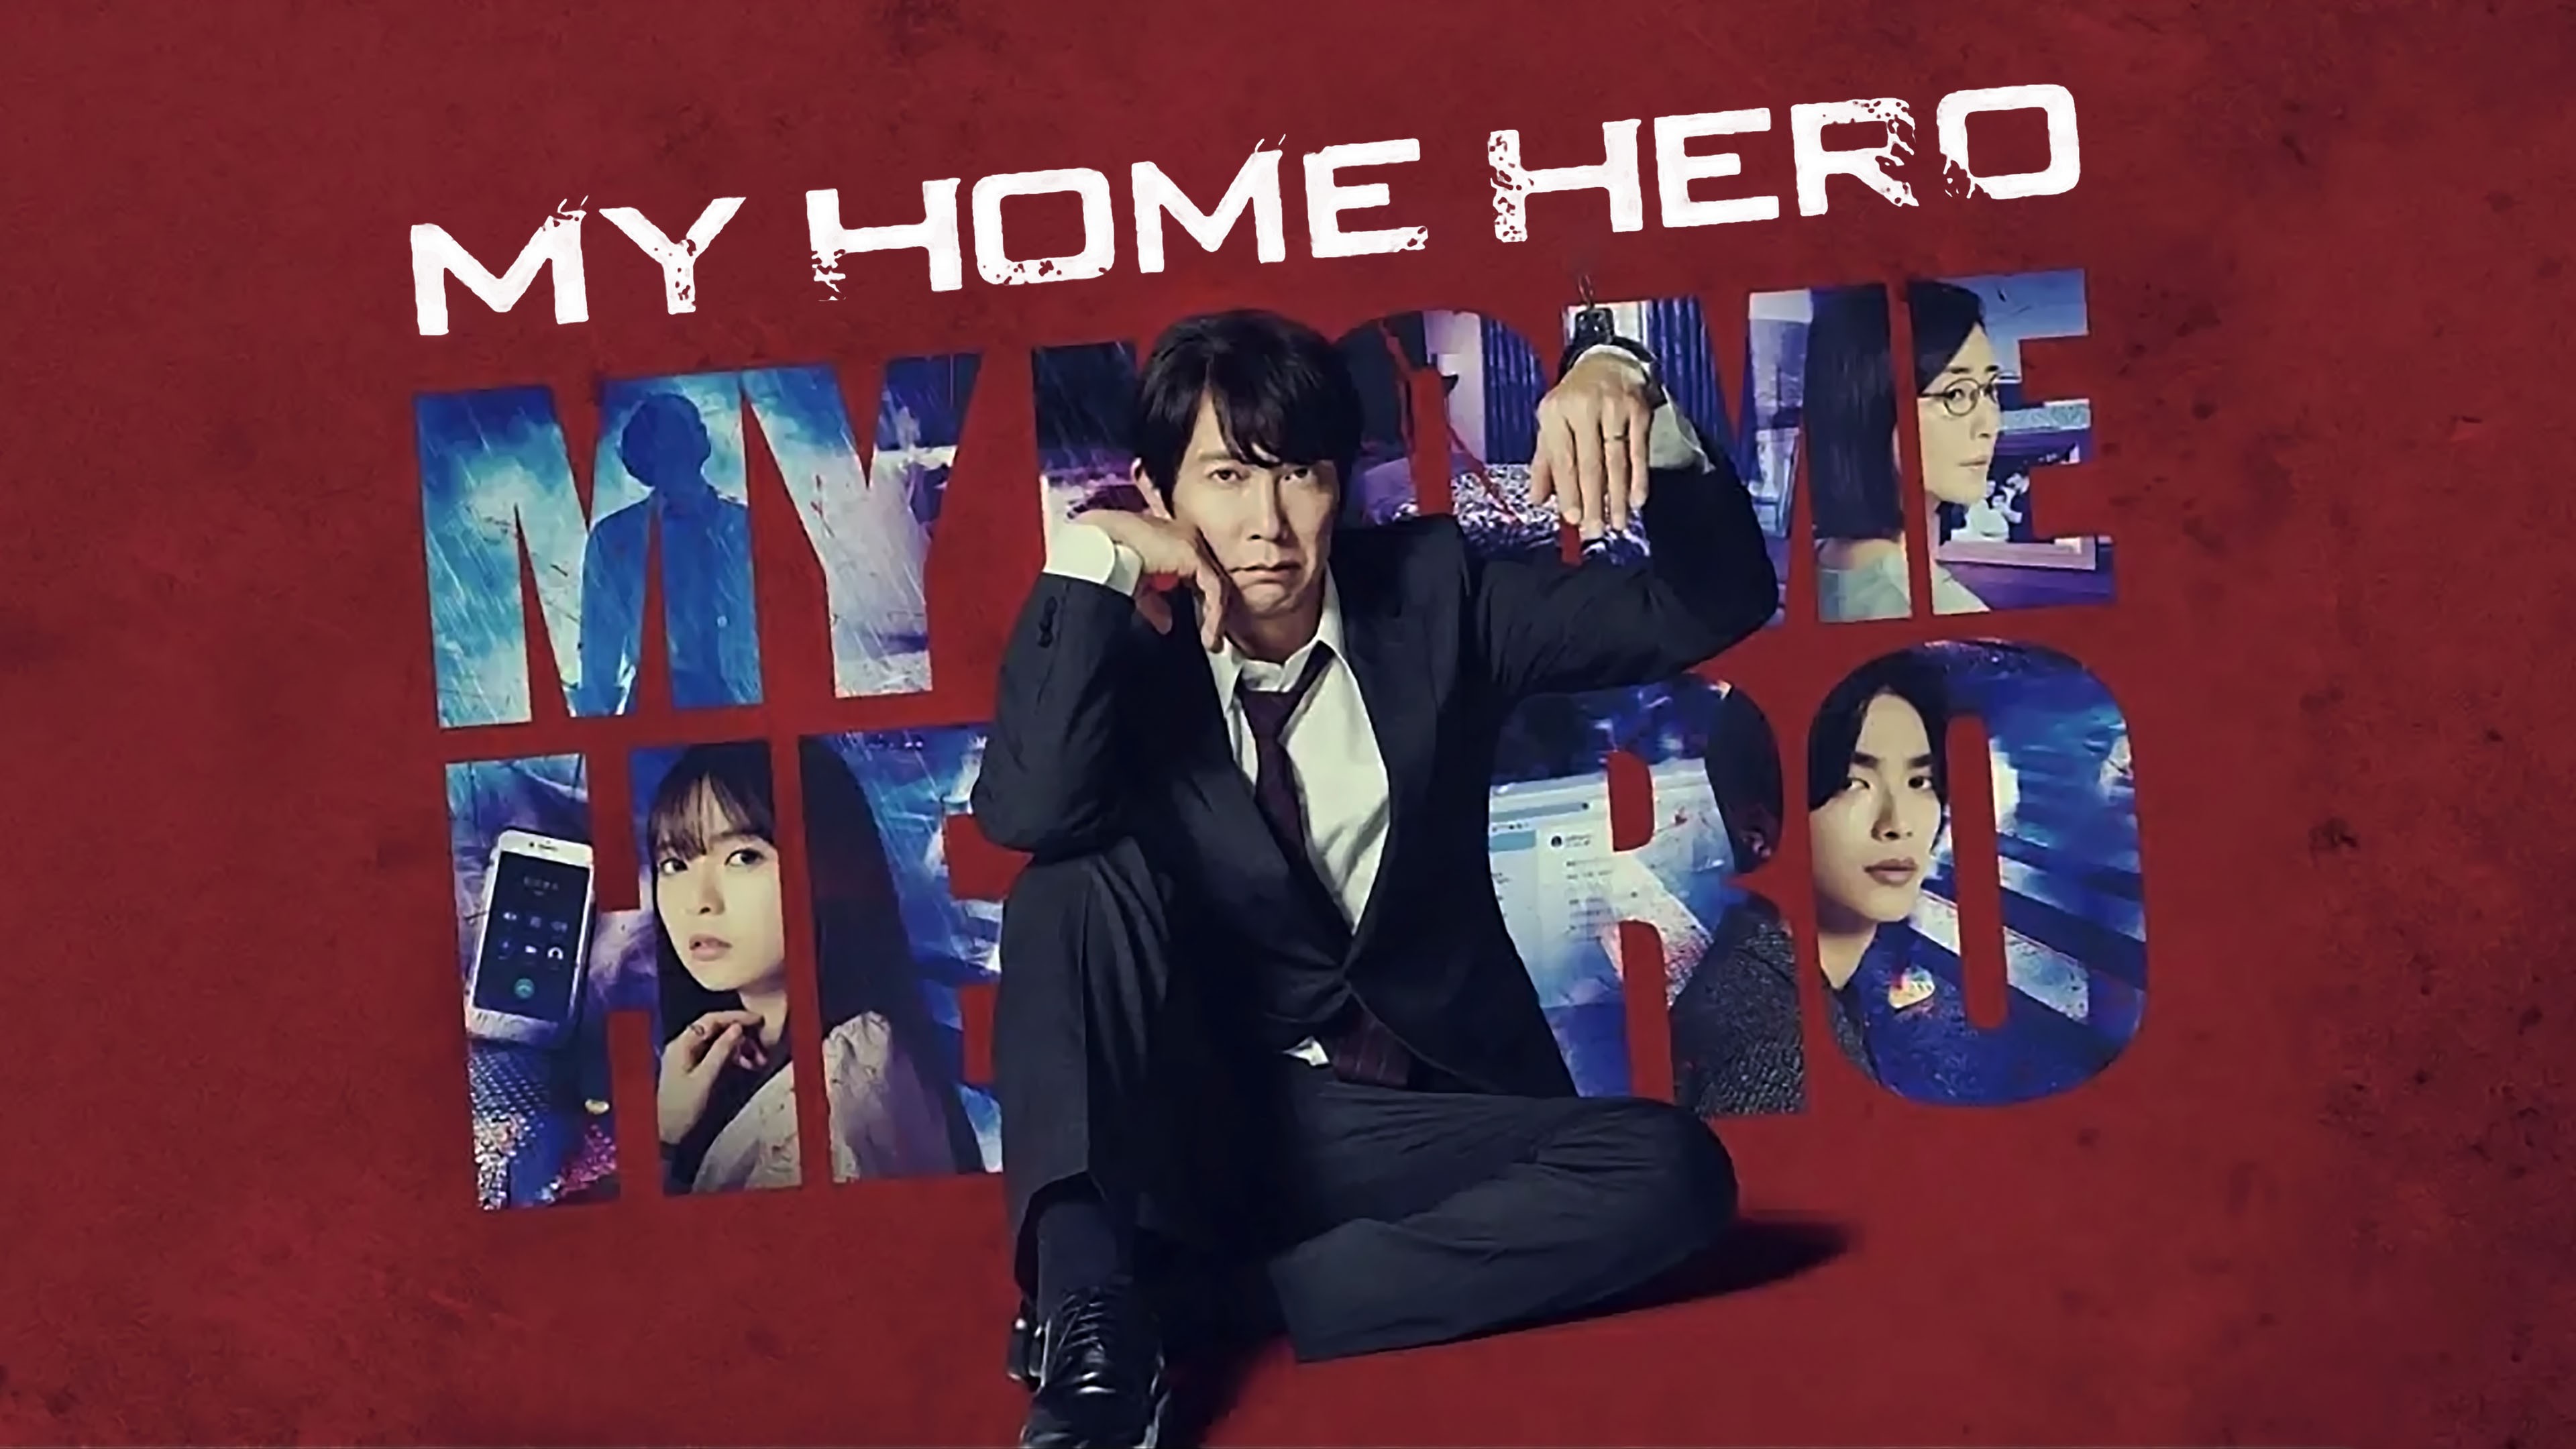 My Home Hero Gets Live-Action TV Series and Film Adaptation